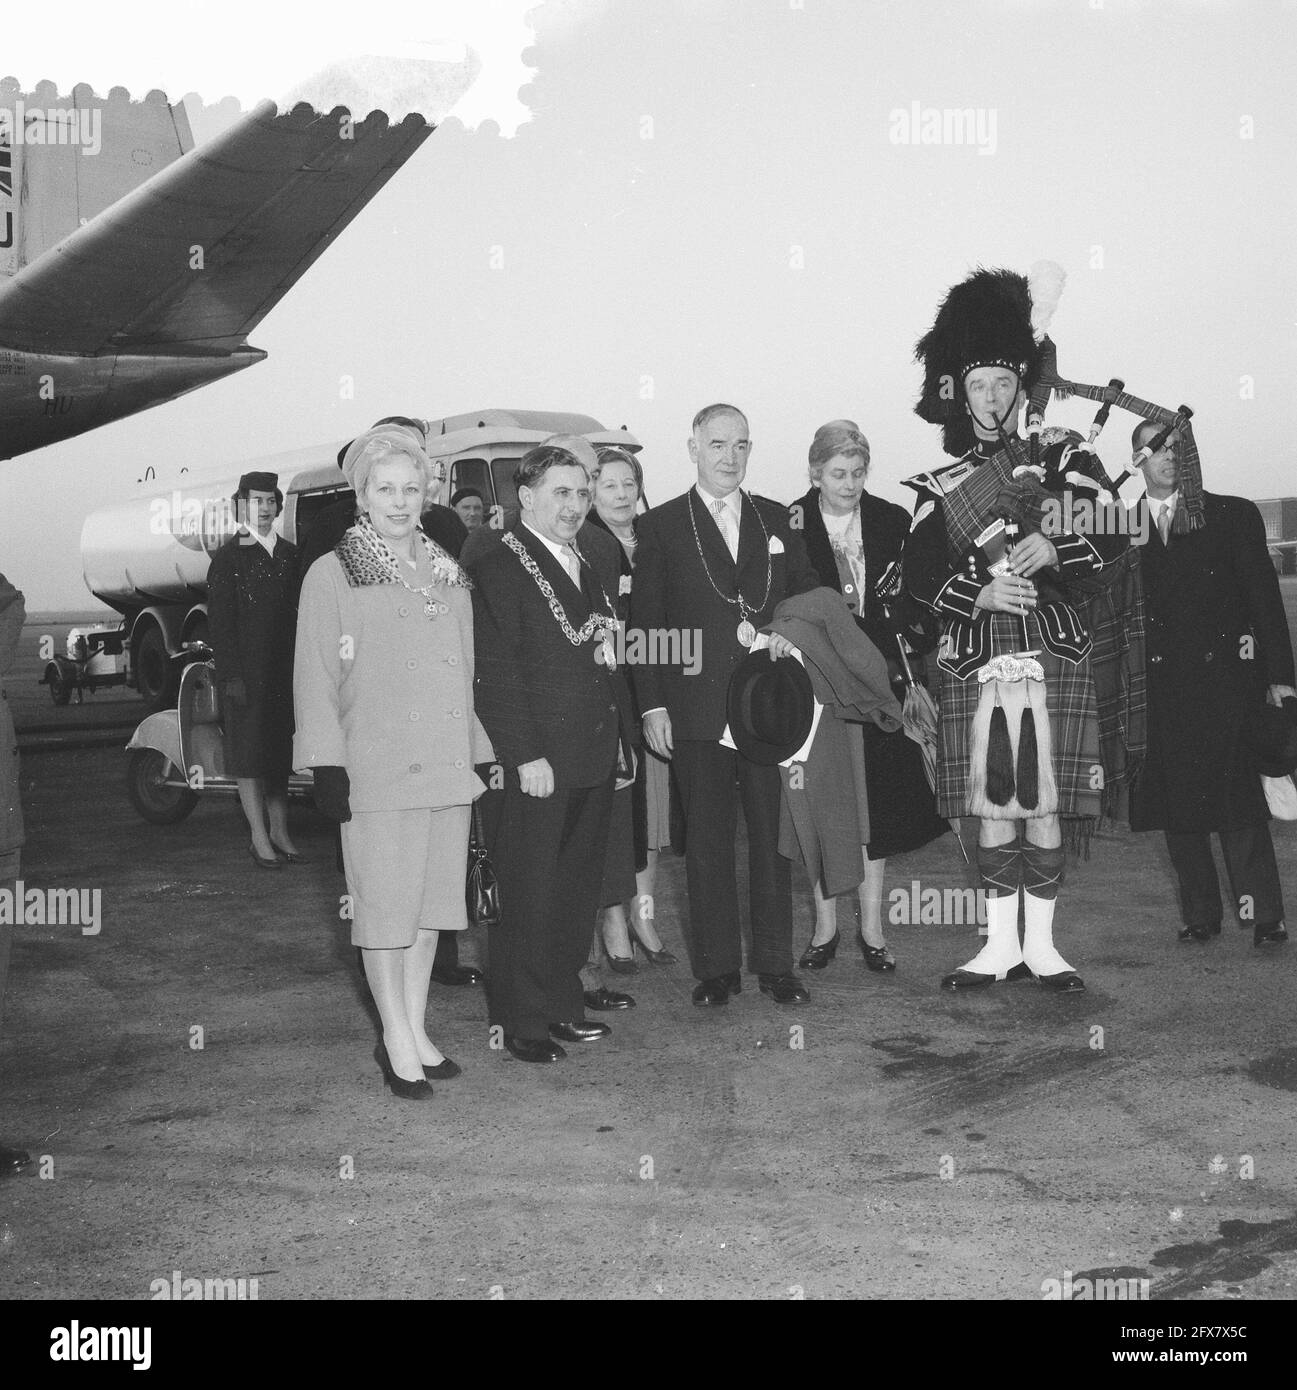 Arrival Lord Provost of Glasgow at Schiphol Airport, December 6, 1959, ARRIVALS, The Netherlands, 20th century press agency photo, news to remember, documentary, historic photography 1945-1990, visual stories, human history of the Twentieth Century, capturing moments in time Stock Photo